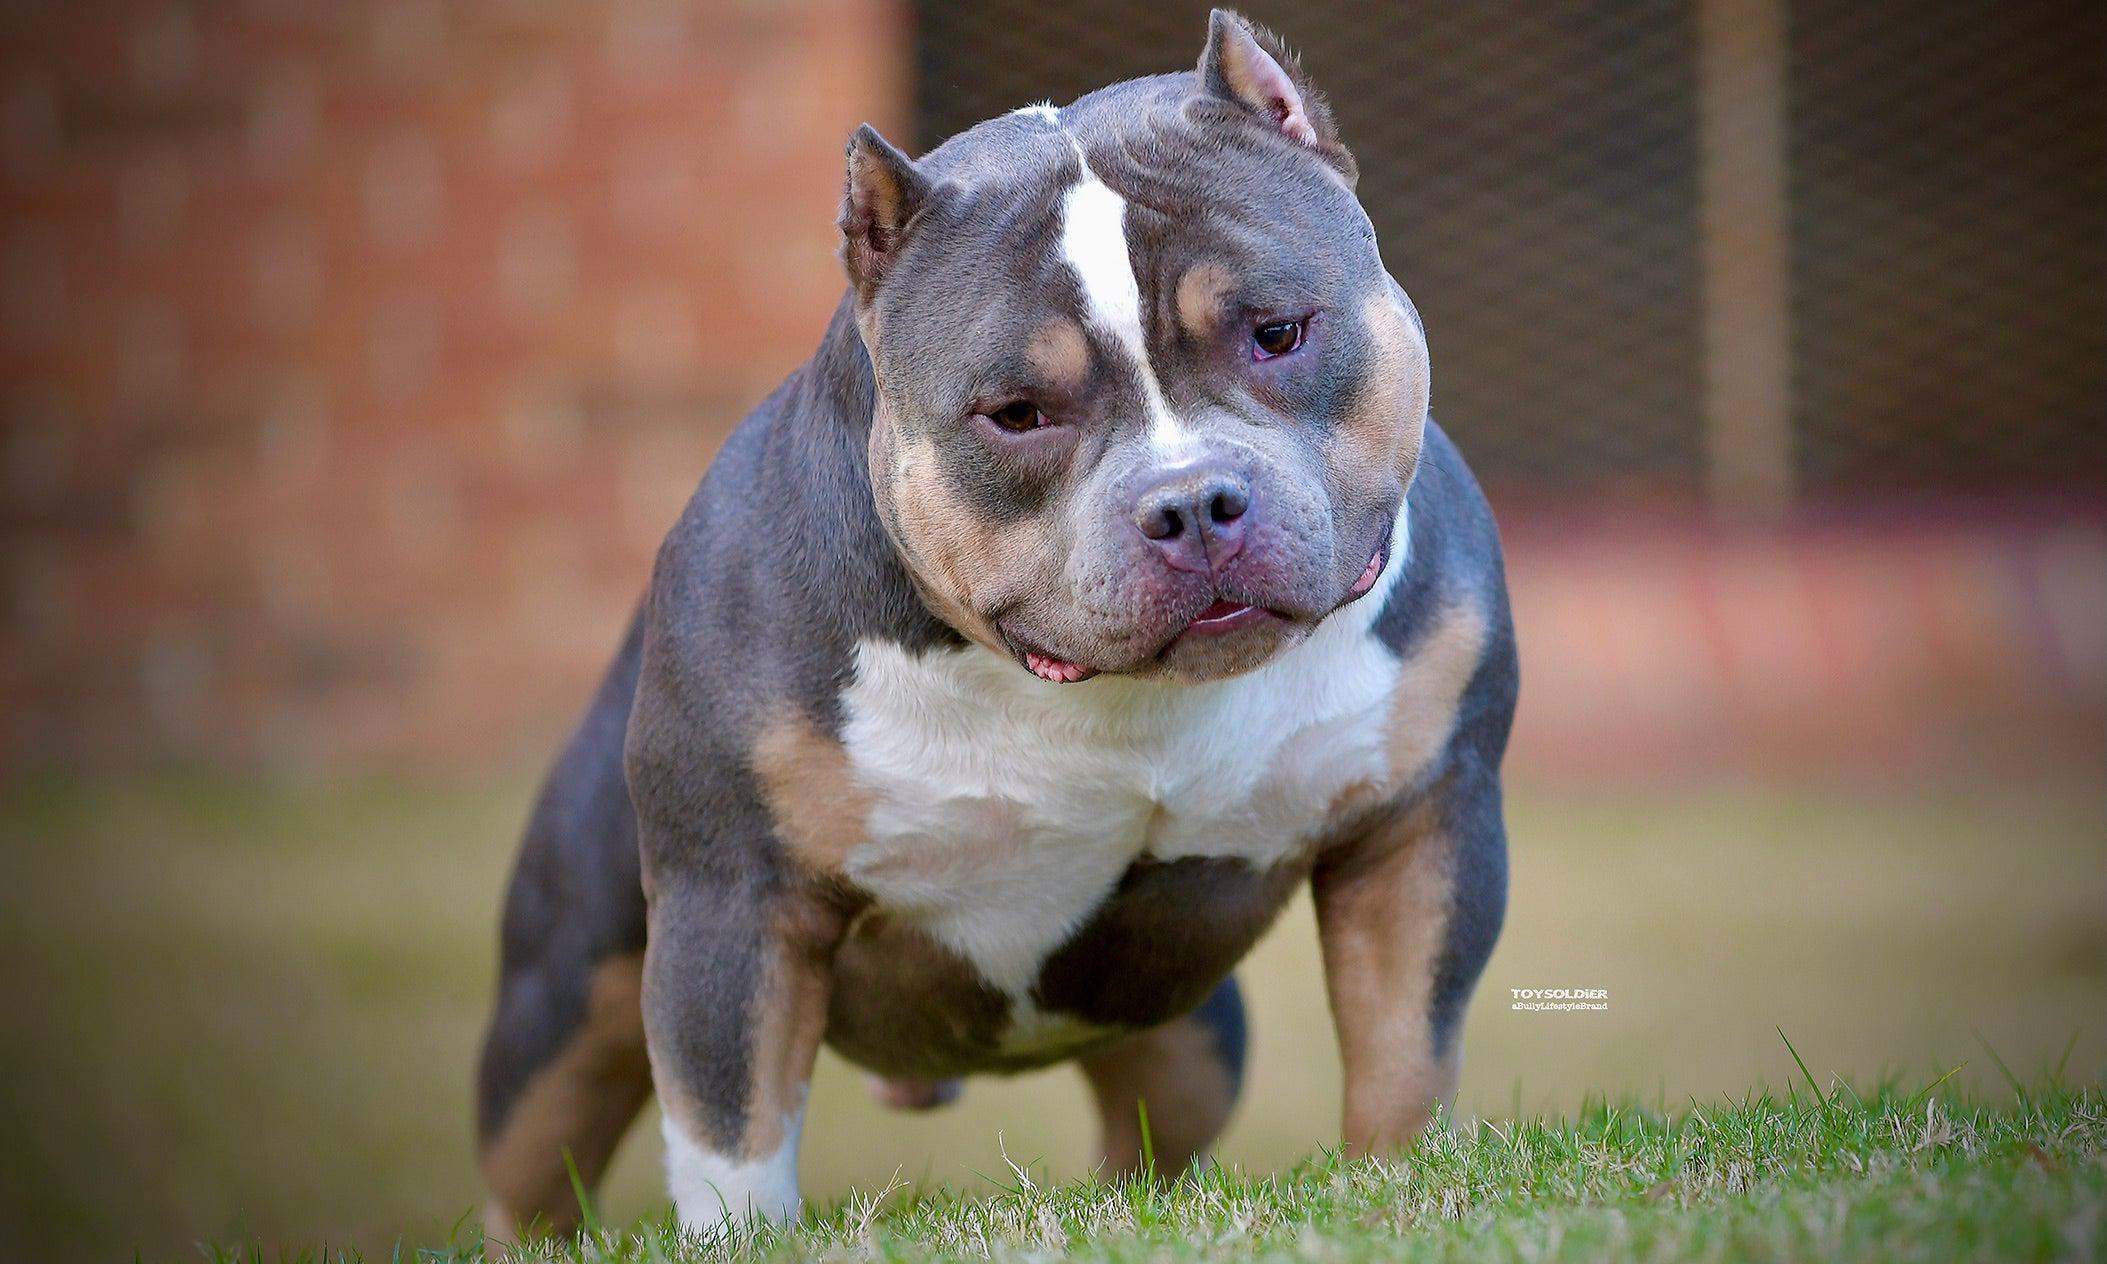 american bully puppies, puppies for sale, venomline, pocket bully, micro bully, exotic bully, extreme bully, puppies for sale